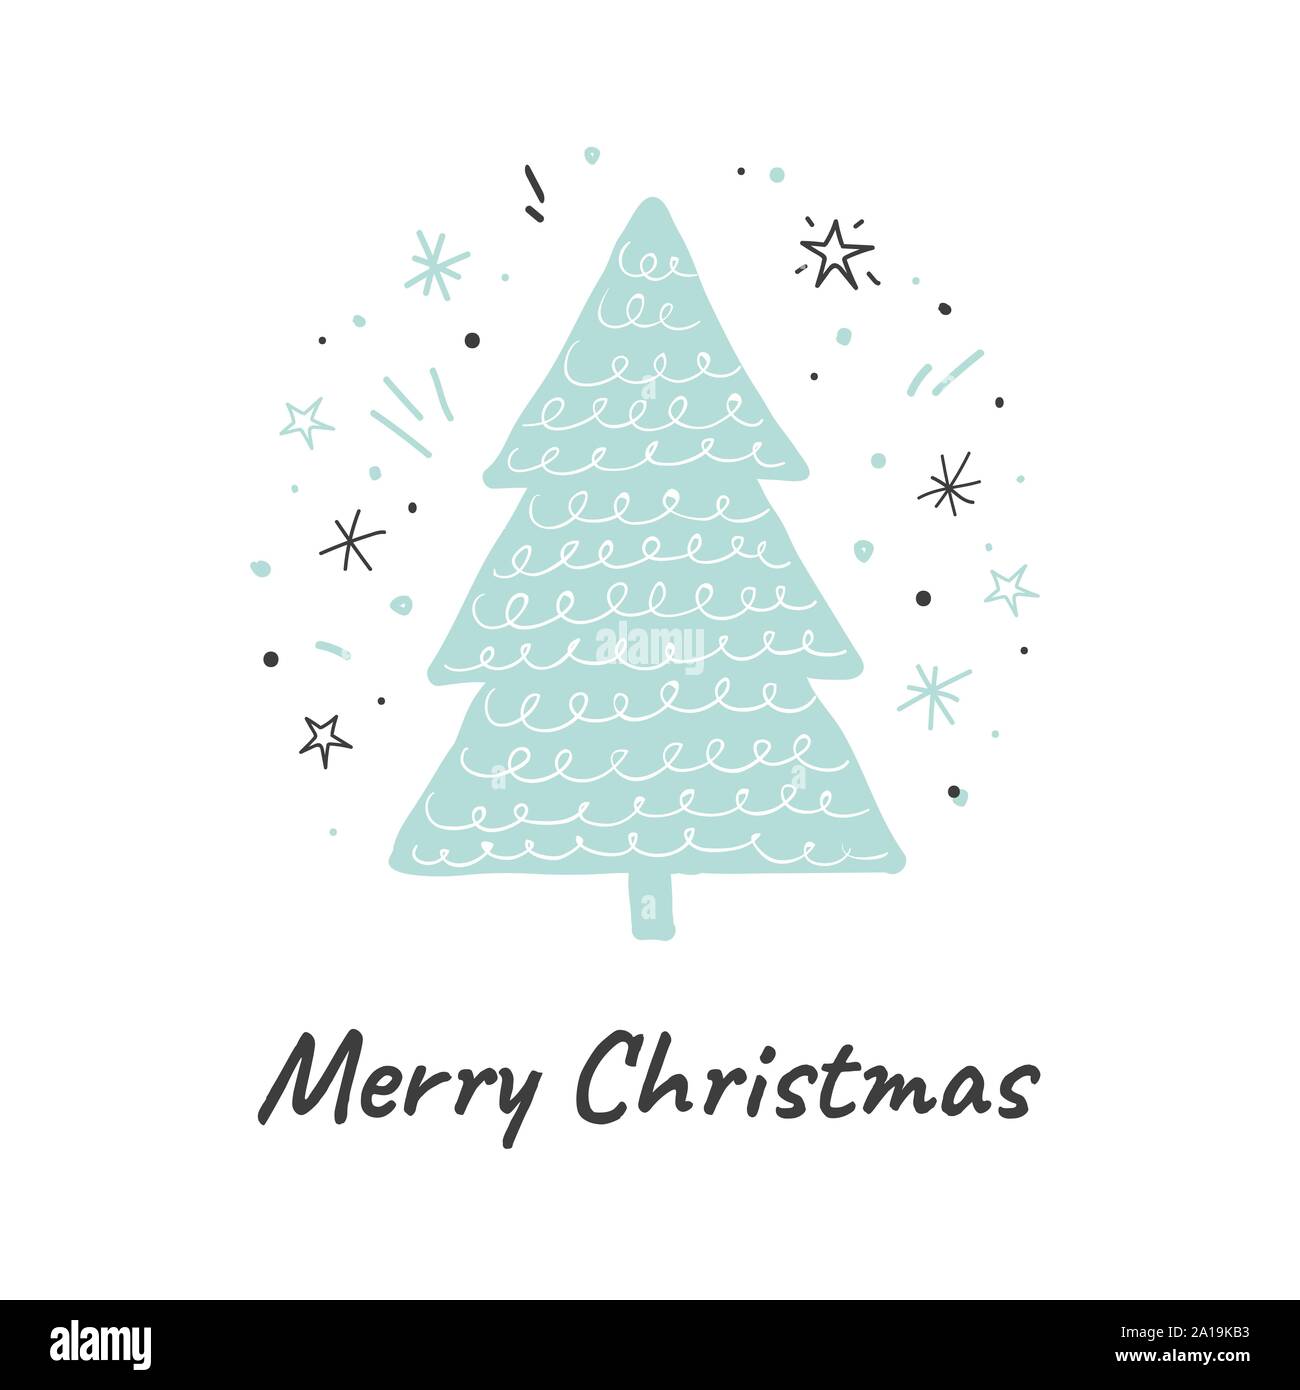 Merry Christmas. Vector greeting card with cute hand drawn Christmas tree. Scandinavian illustration Stock Vector